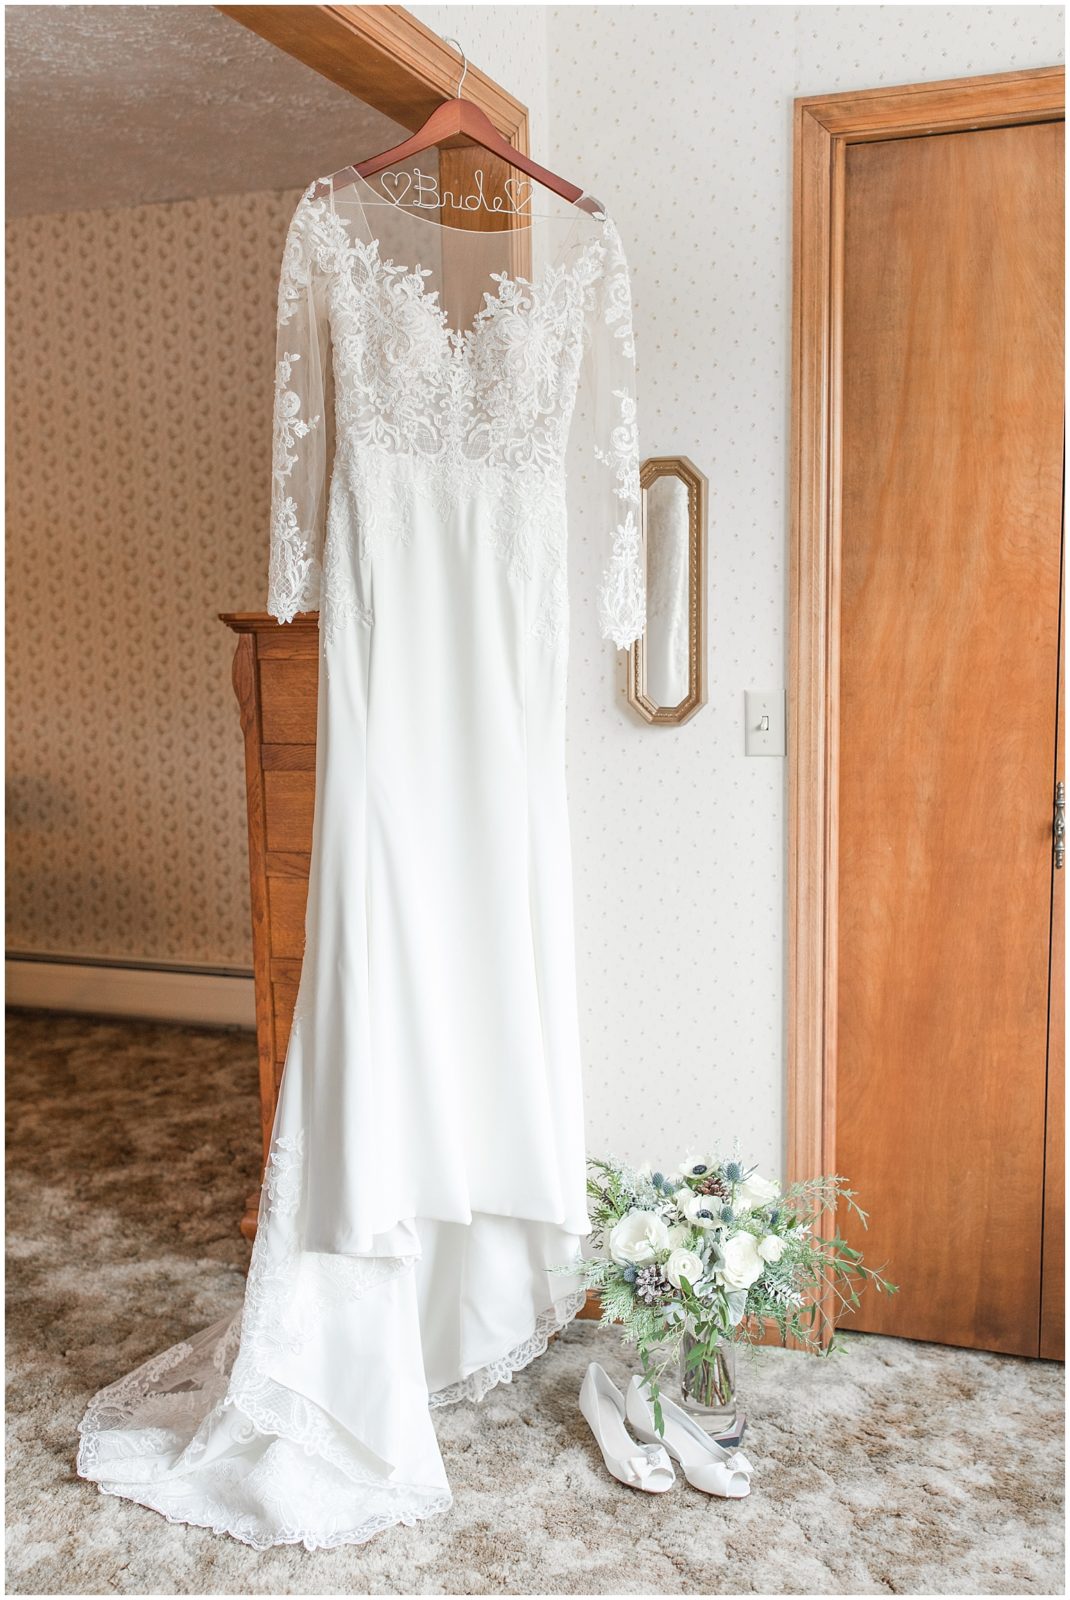 Wedding Details, shot by Jessica Brees, photographer and videographer near Sioux City, Iowa